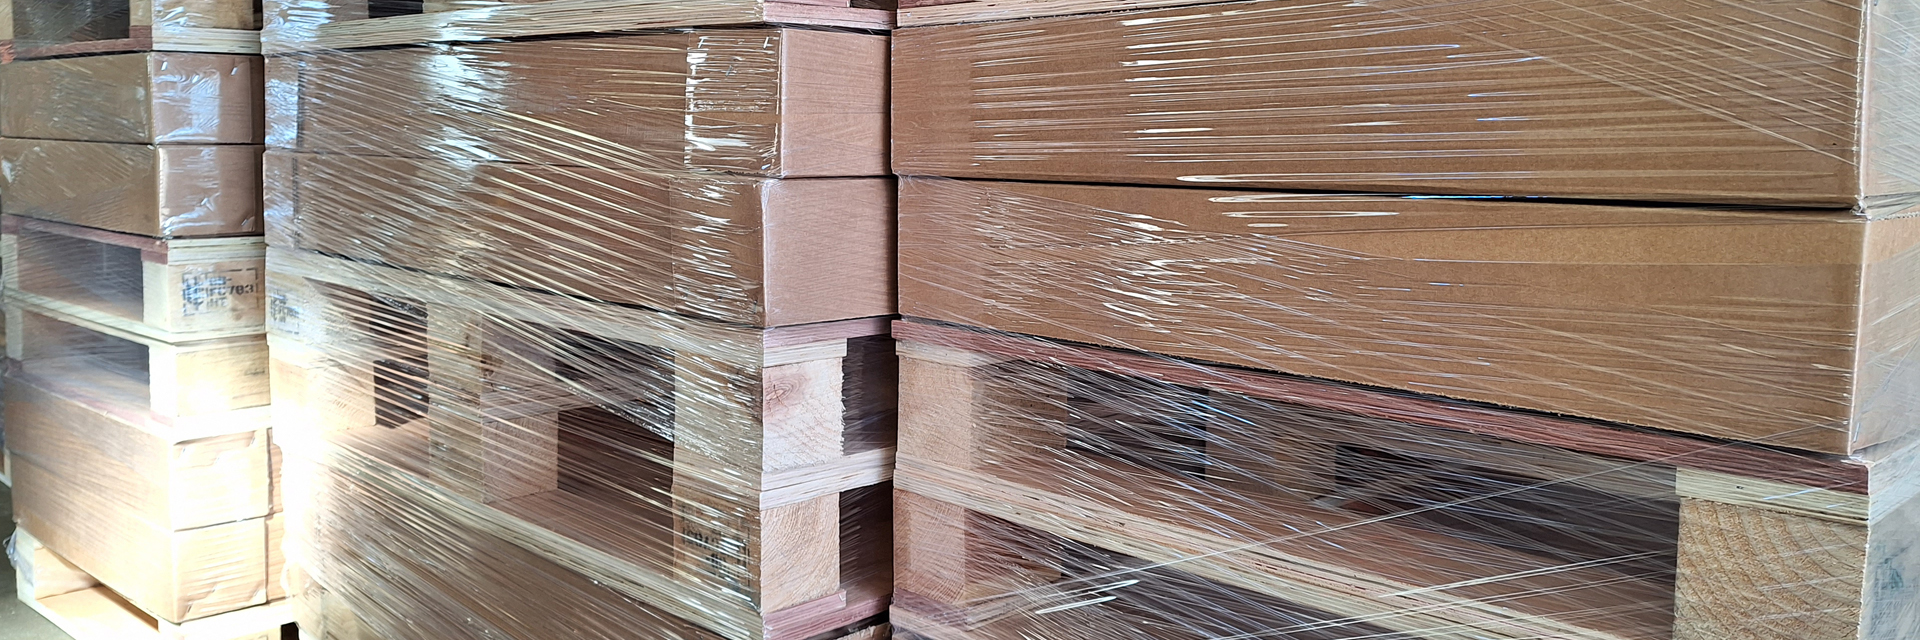 Image showing wooden pallets wrapped in plastic foil